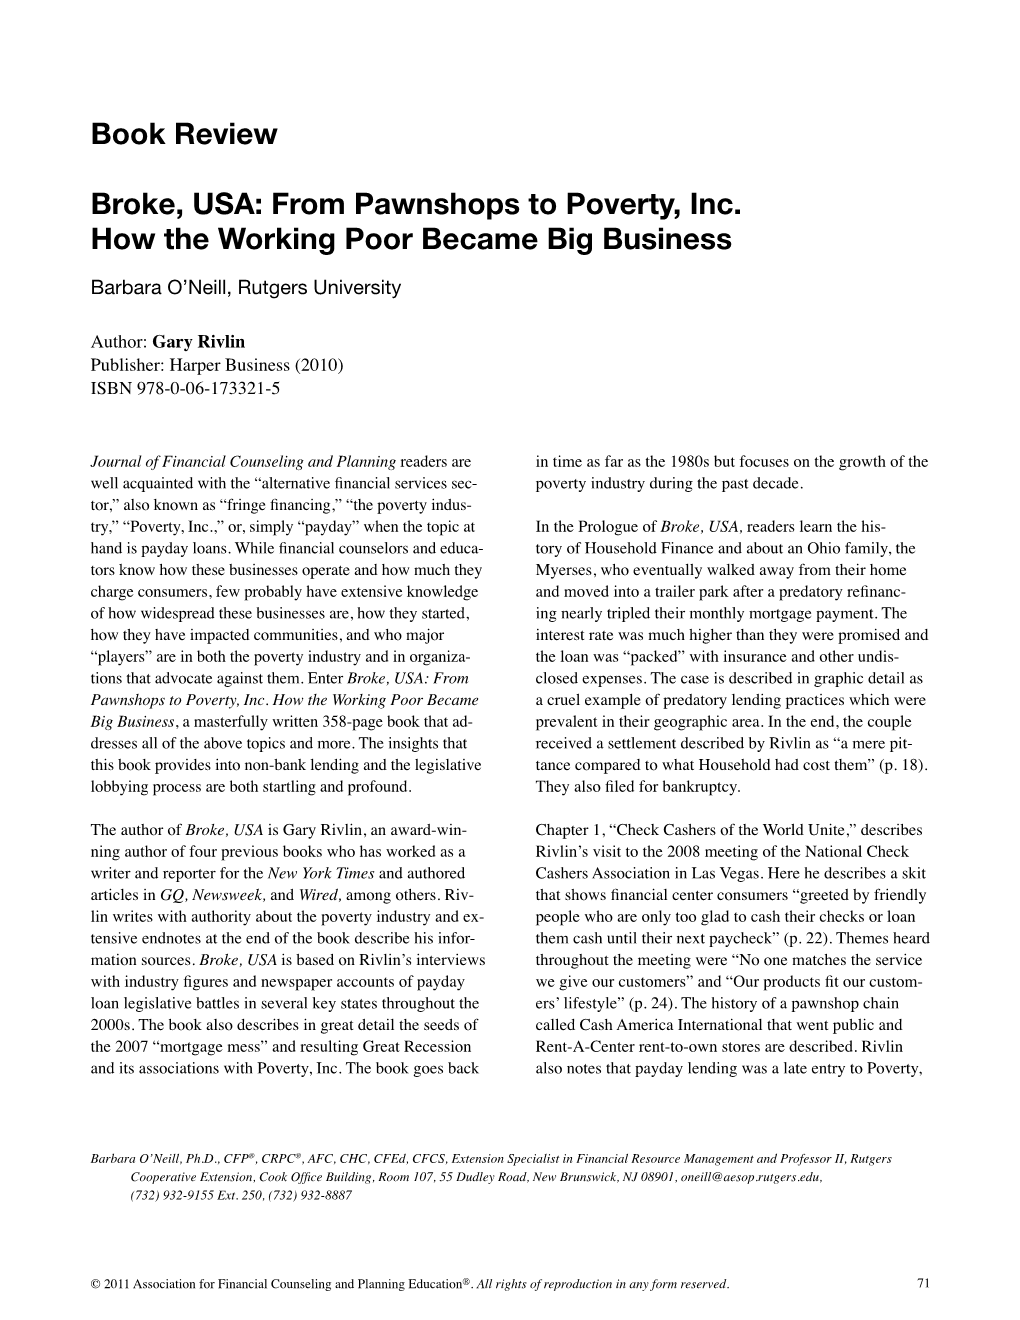 Book Review Broke, USA: from Pawnshops to Poverty, Inc. How The